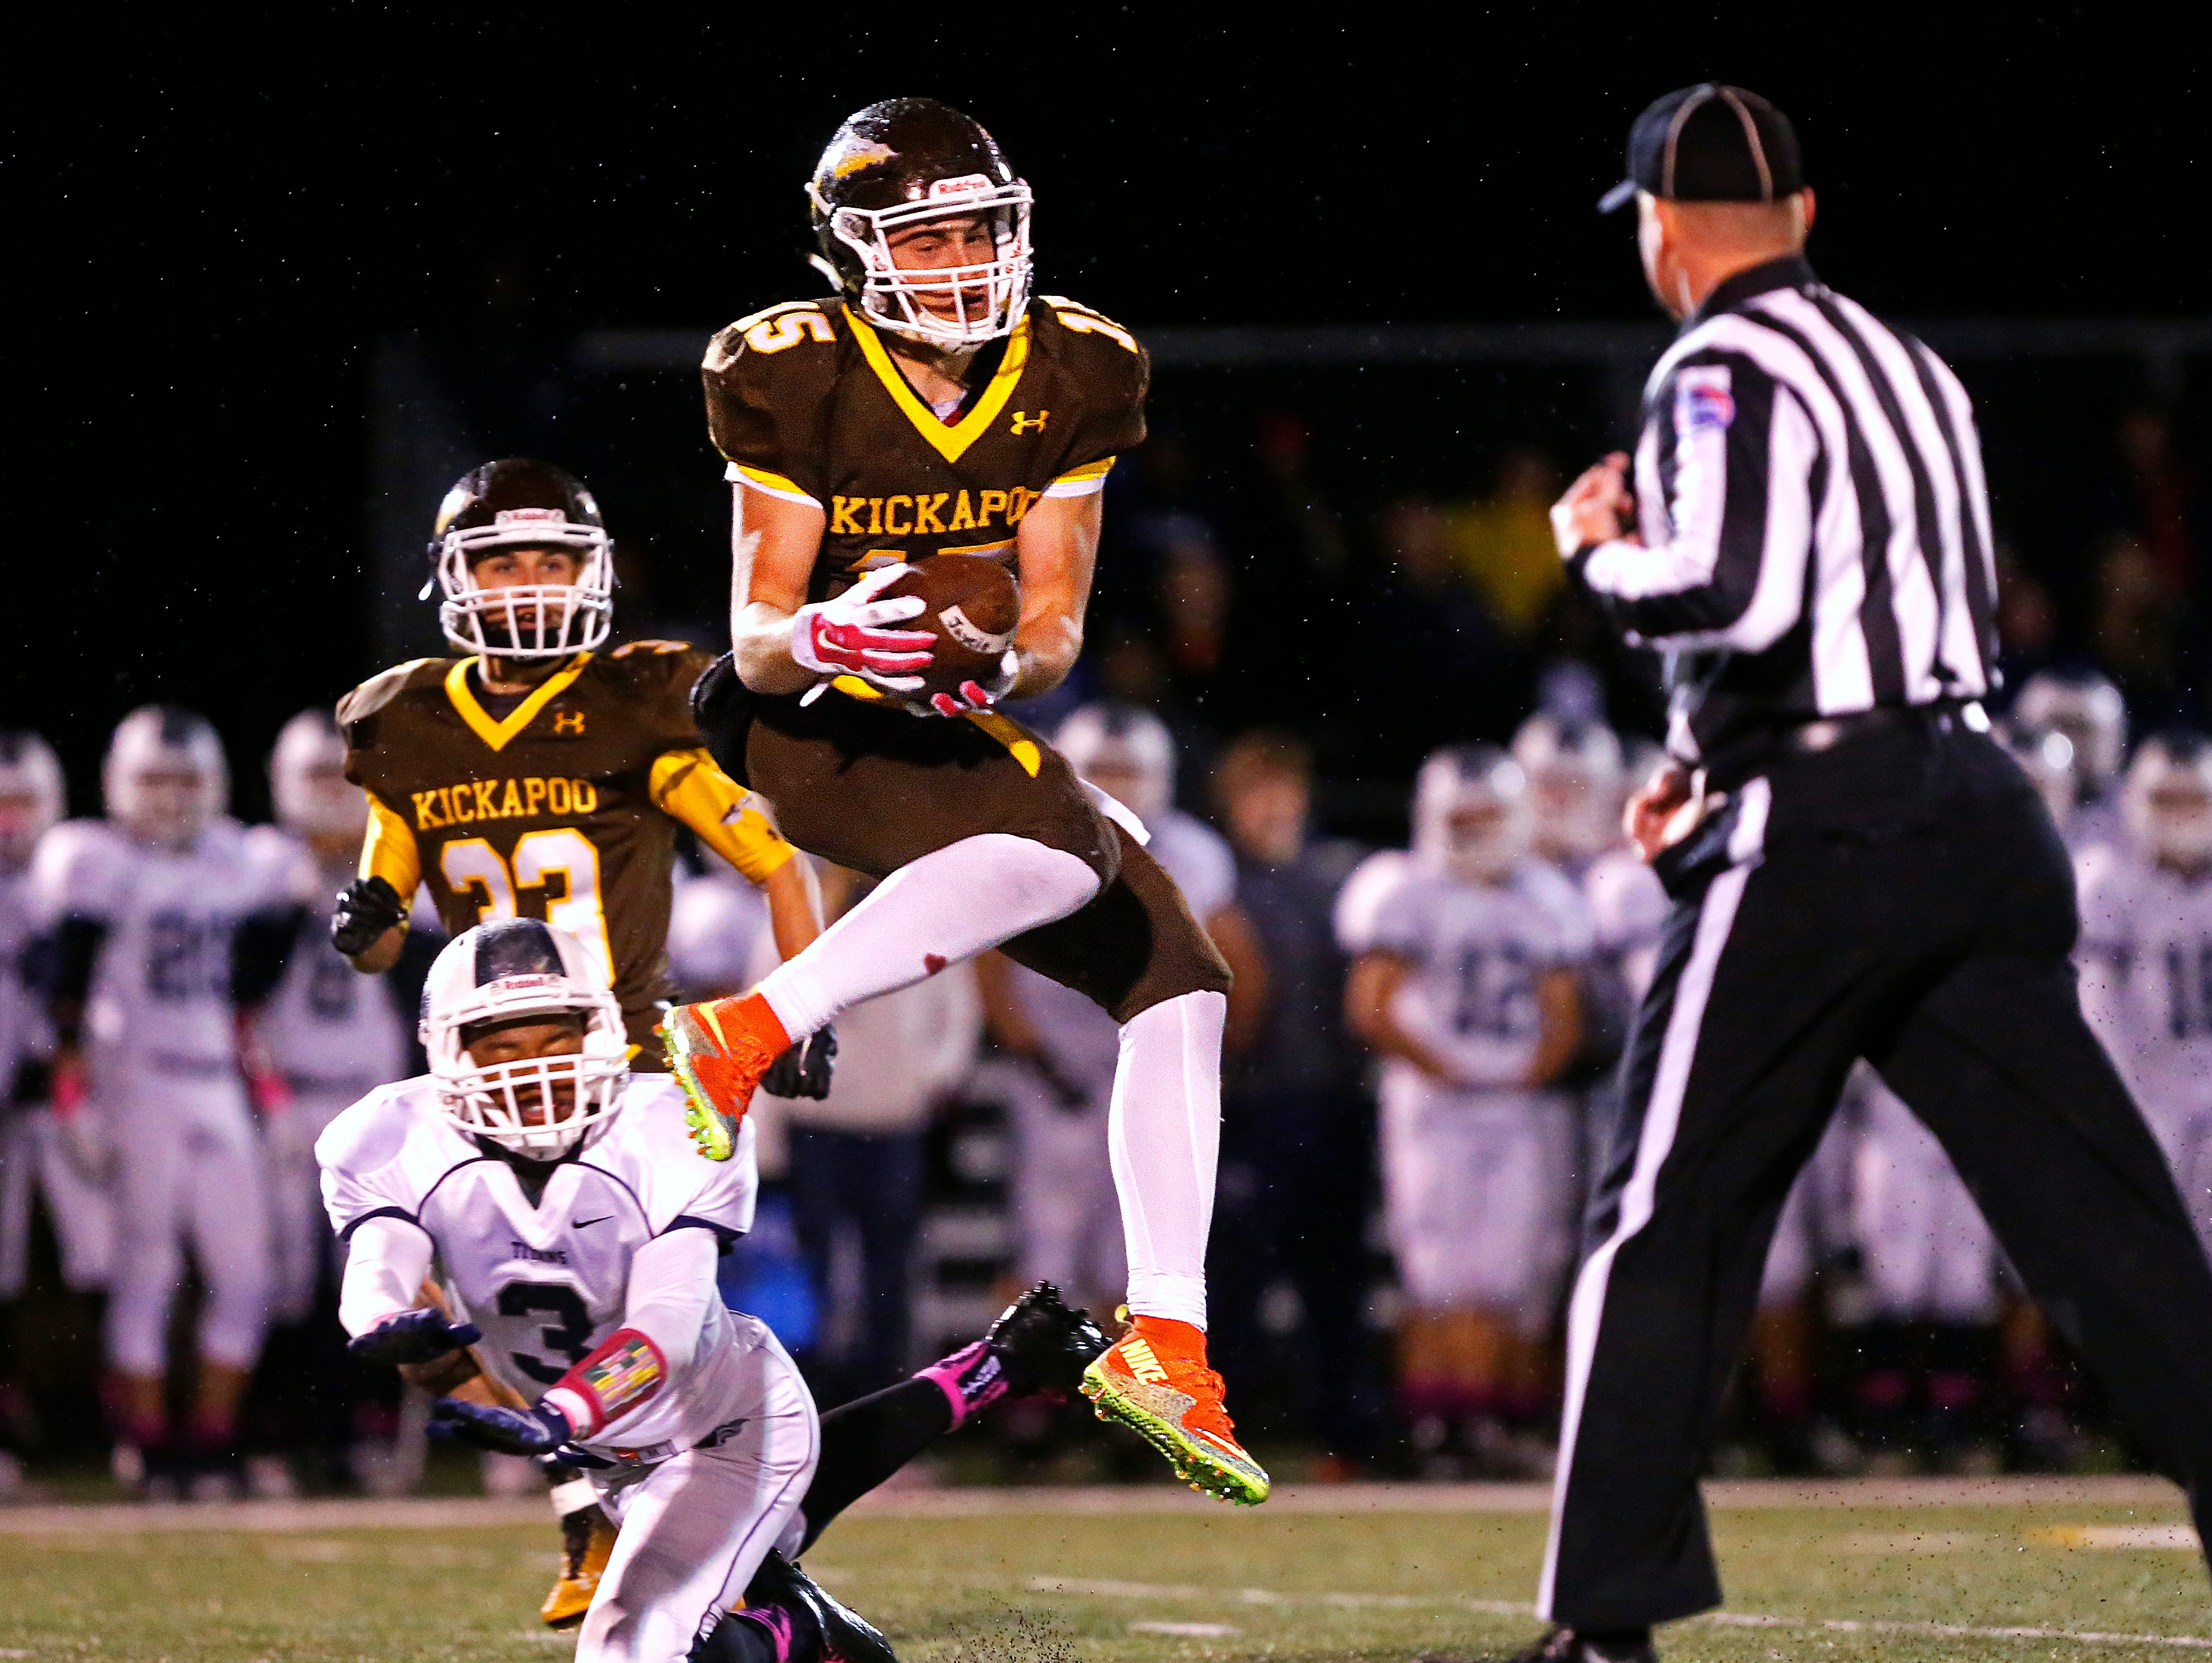 Kickapoo football team improves to 11-0 with playoff victory over Lee’s Summit West ...